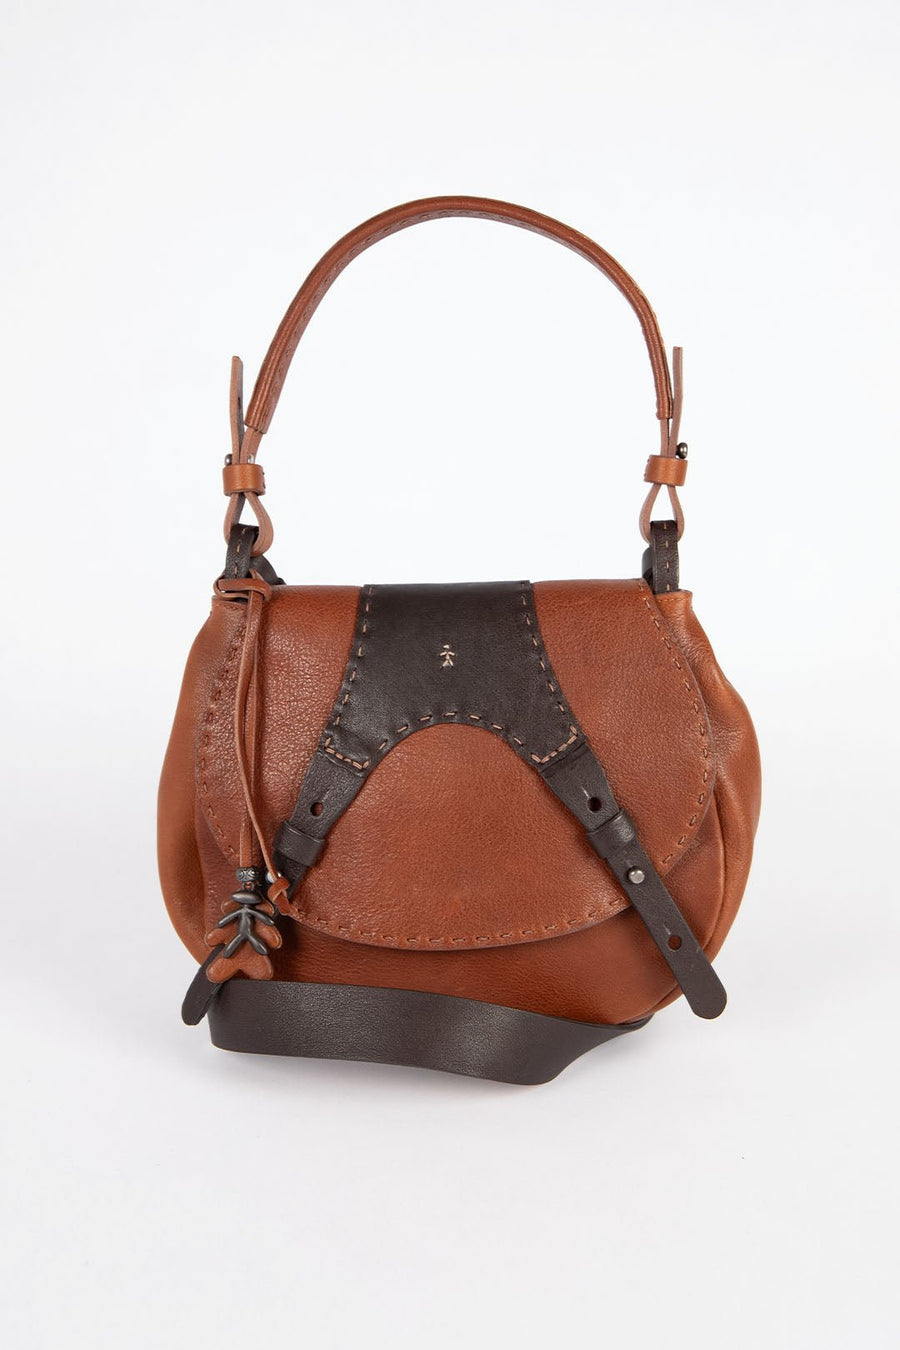 HENRY BEGUELIN SMALL CROSS BODY BAG, BRANDY - Burning Torch Online Boutique